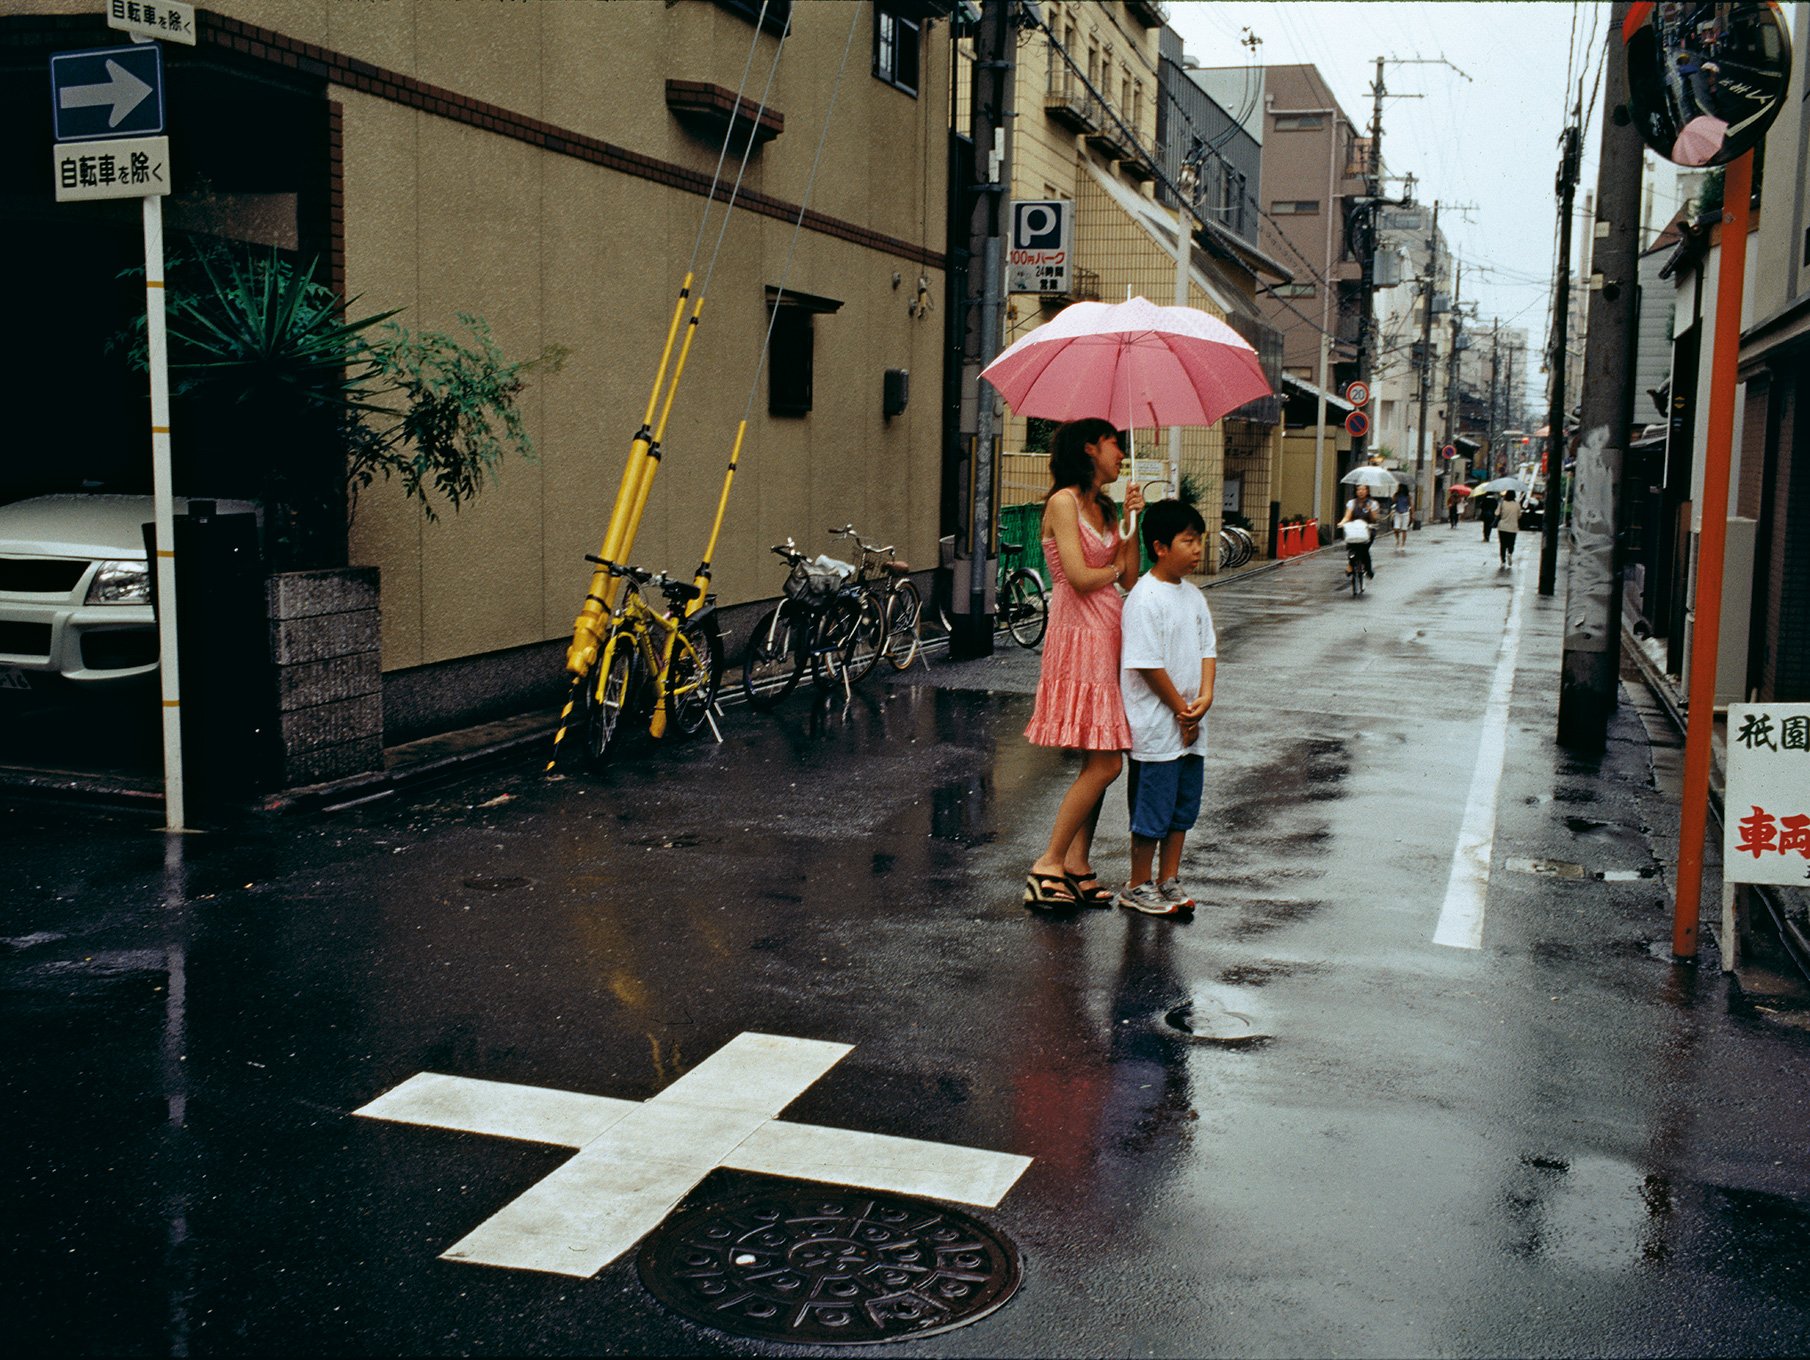   Waiting for the sun, Kyoto, 2004  